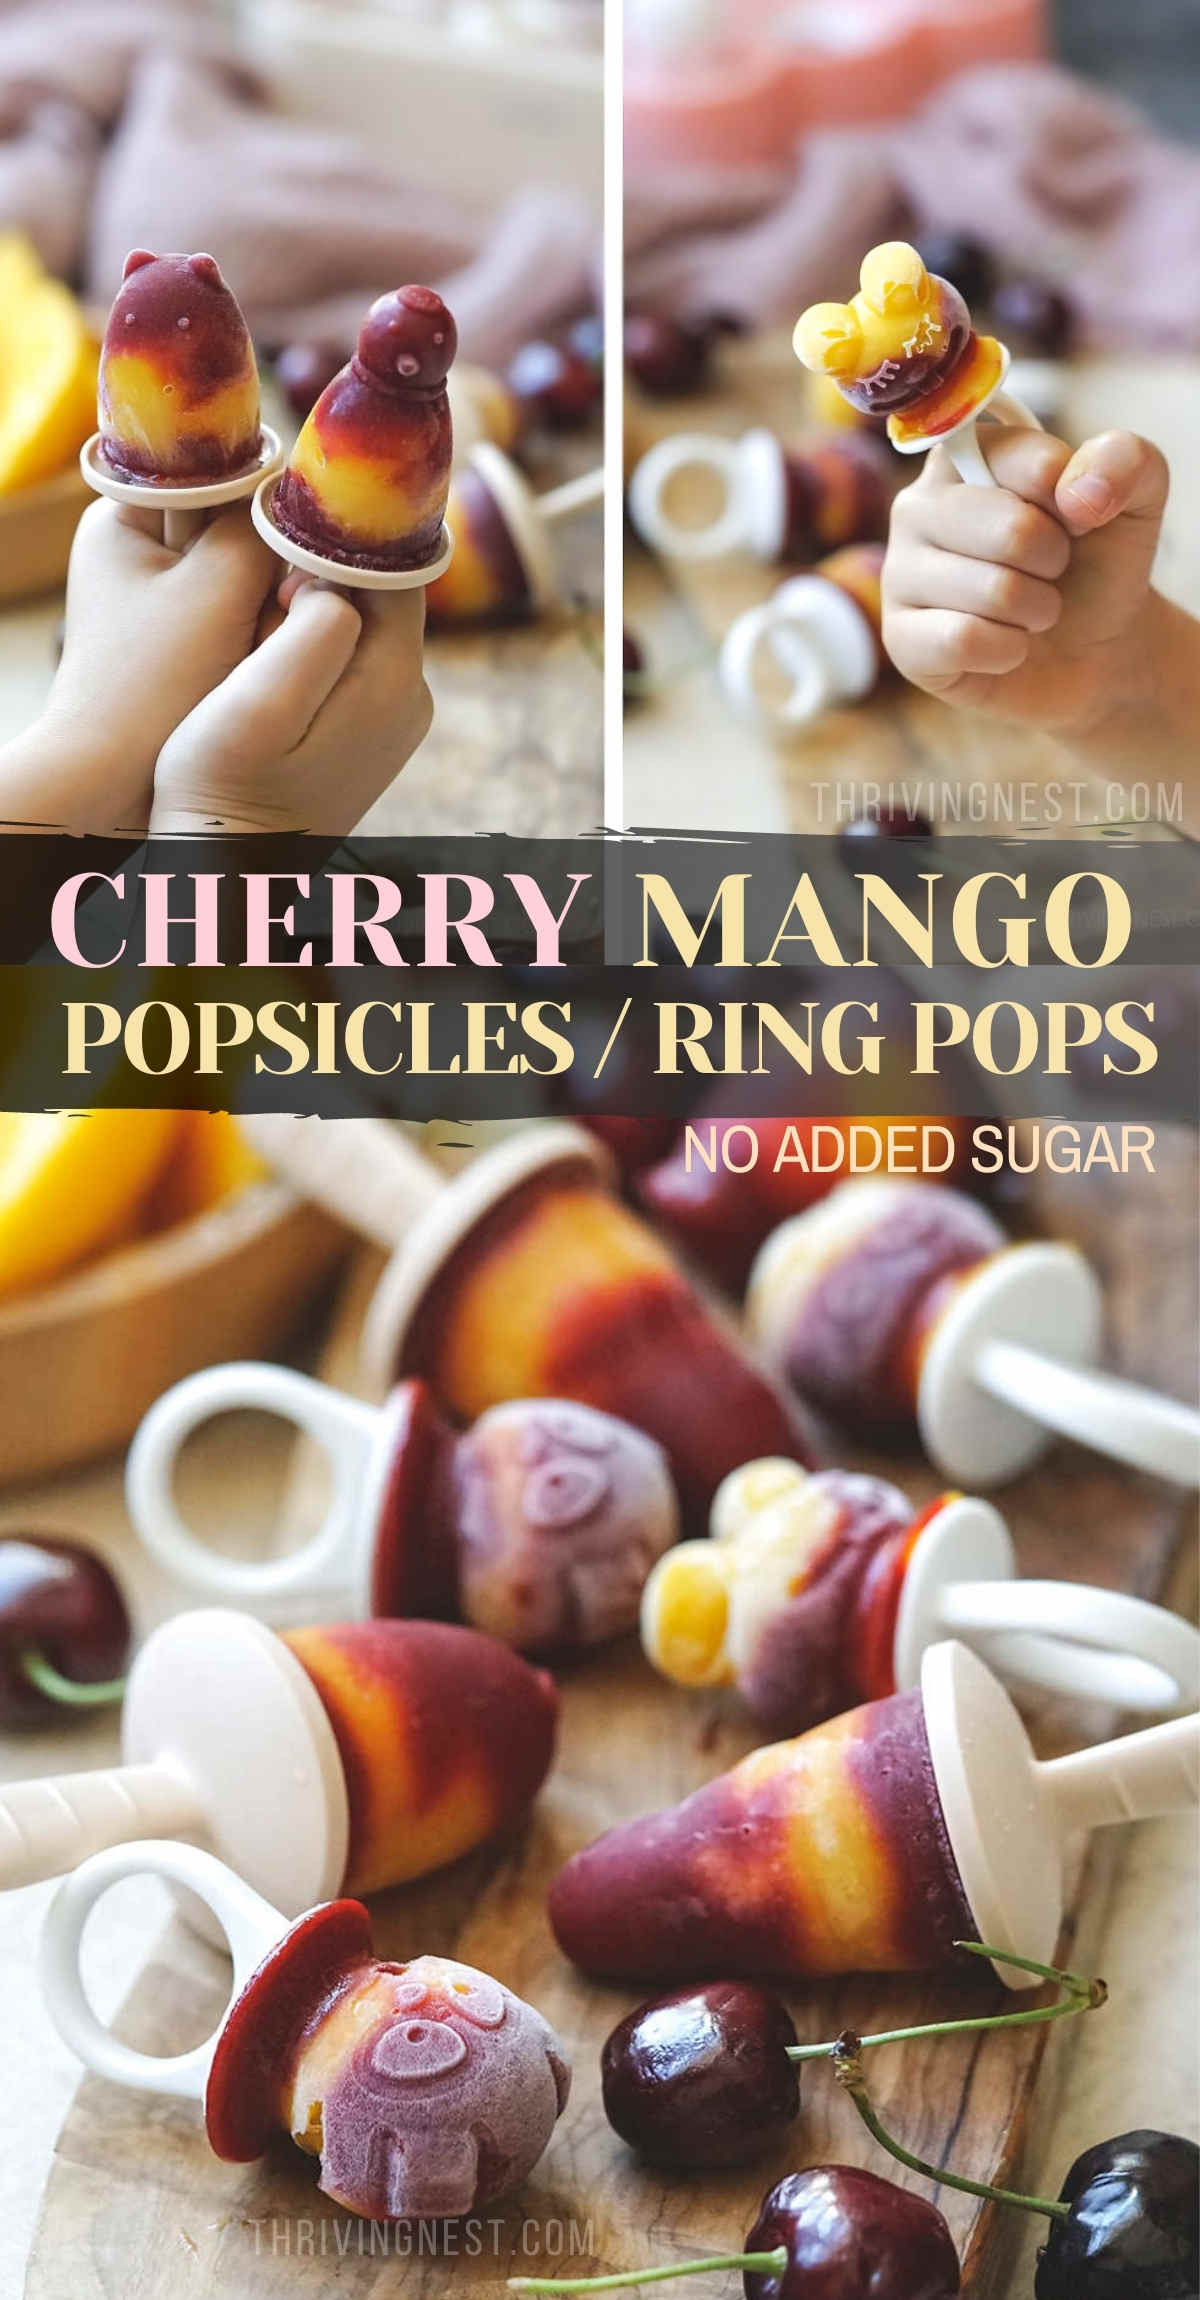 These easy cherry mango popsicles recipe is perfect for your little one to cool down during hot summer days! The sweet taste of fresh sweet mango and cherry is perfect for making baby popsicles without adding juice or sugar. These whole fruit mango cherry popsicles make a healthy snack option that is low in sugar and high in vitamins and antioxidants.
#cherry #mango #popsicles #baby #toddler #kids #icepops #ringpops
